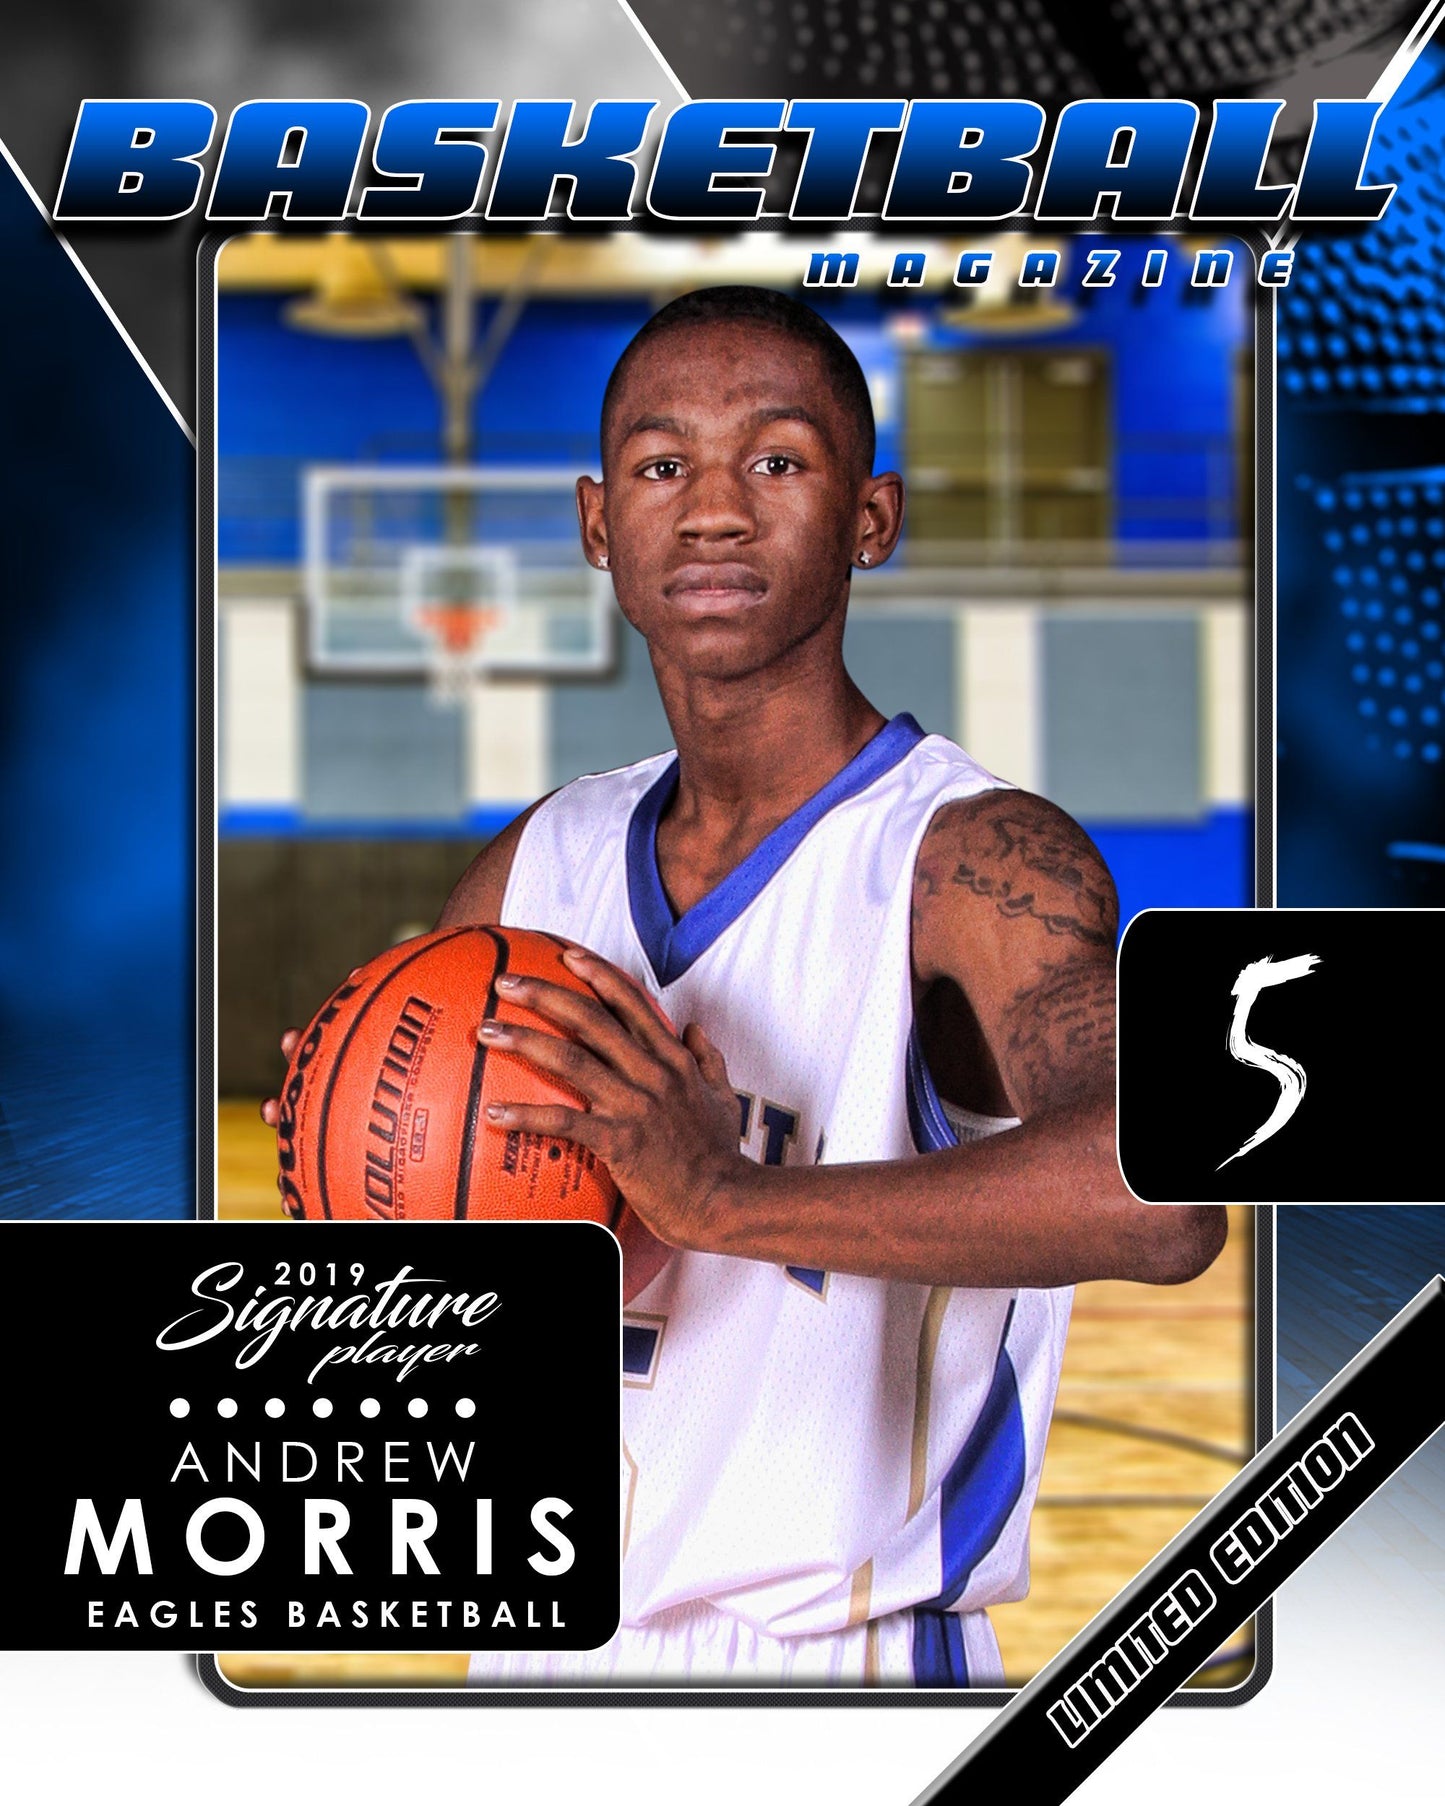 Signature Player - Basketball - V2 - Drop-In Magazine Cover Template-Photoshop Template - Photo Solutions